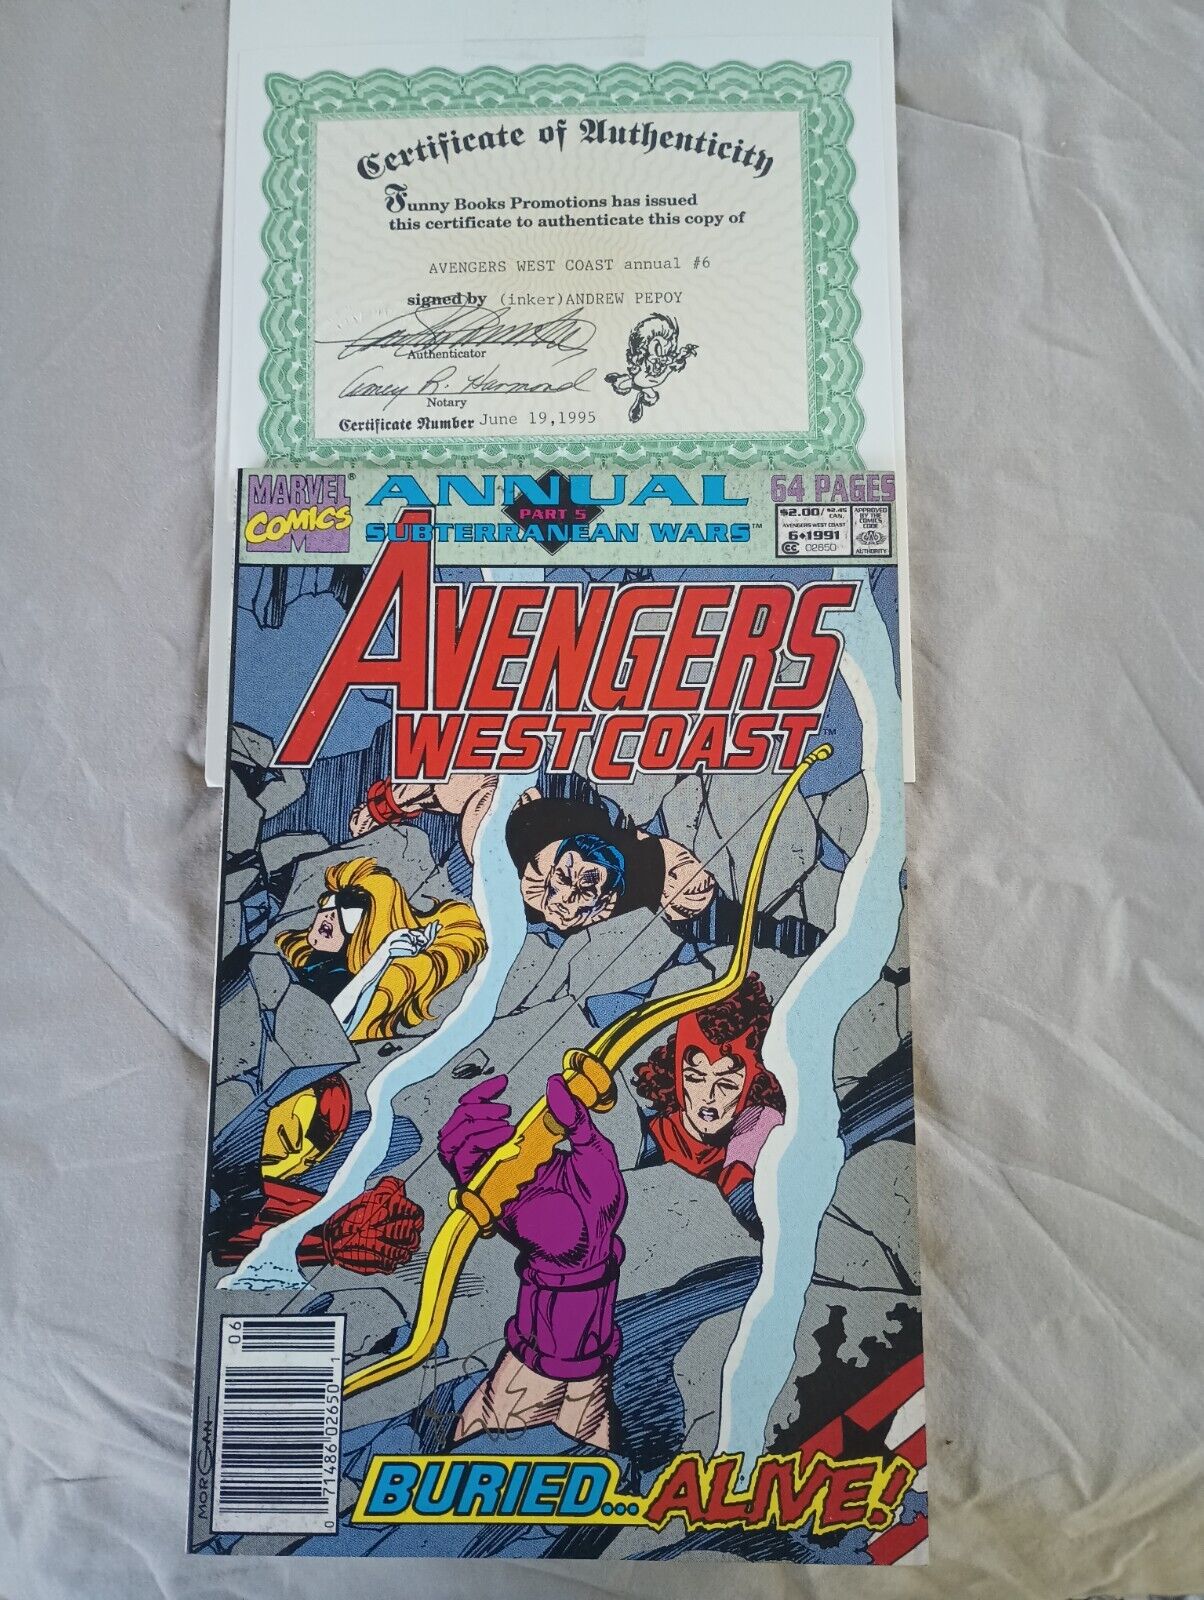 Avengers West Coast Annual #6 (VF) Marvel 1991 signed by Andrew Pepoy